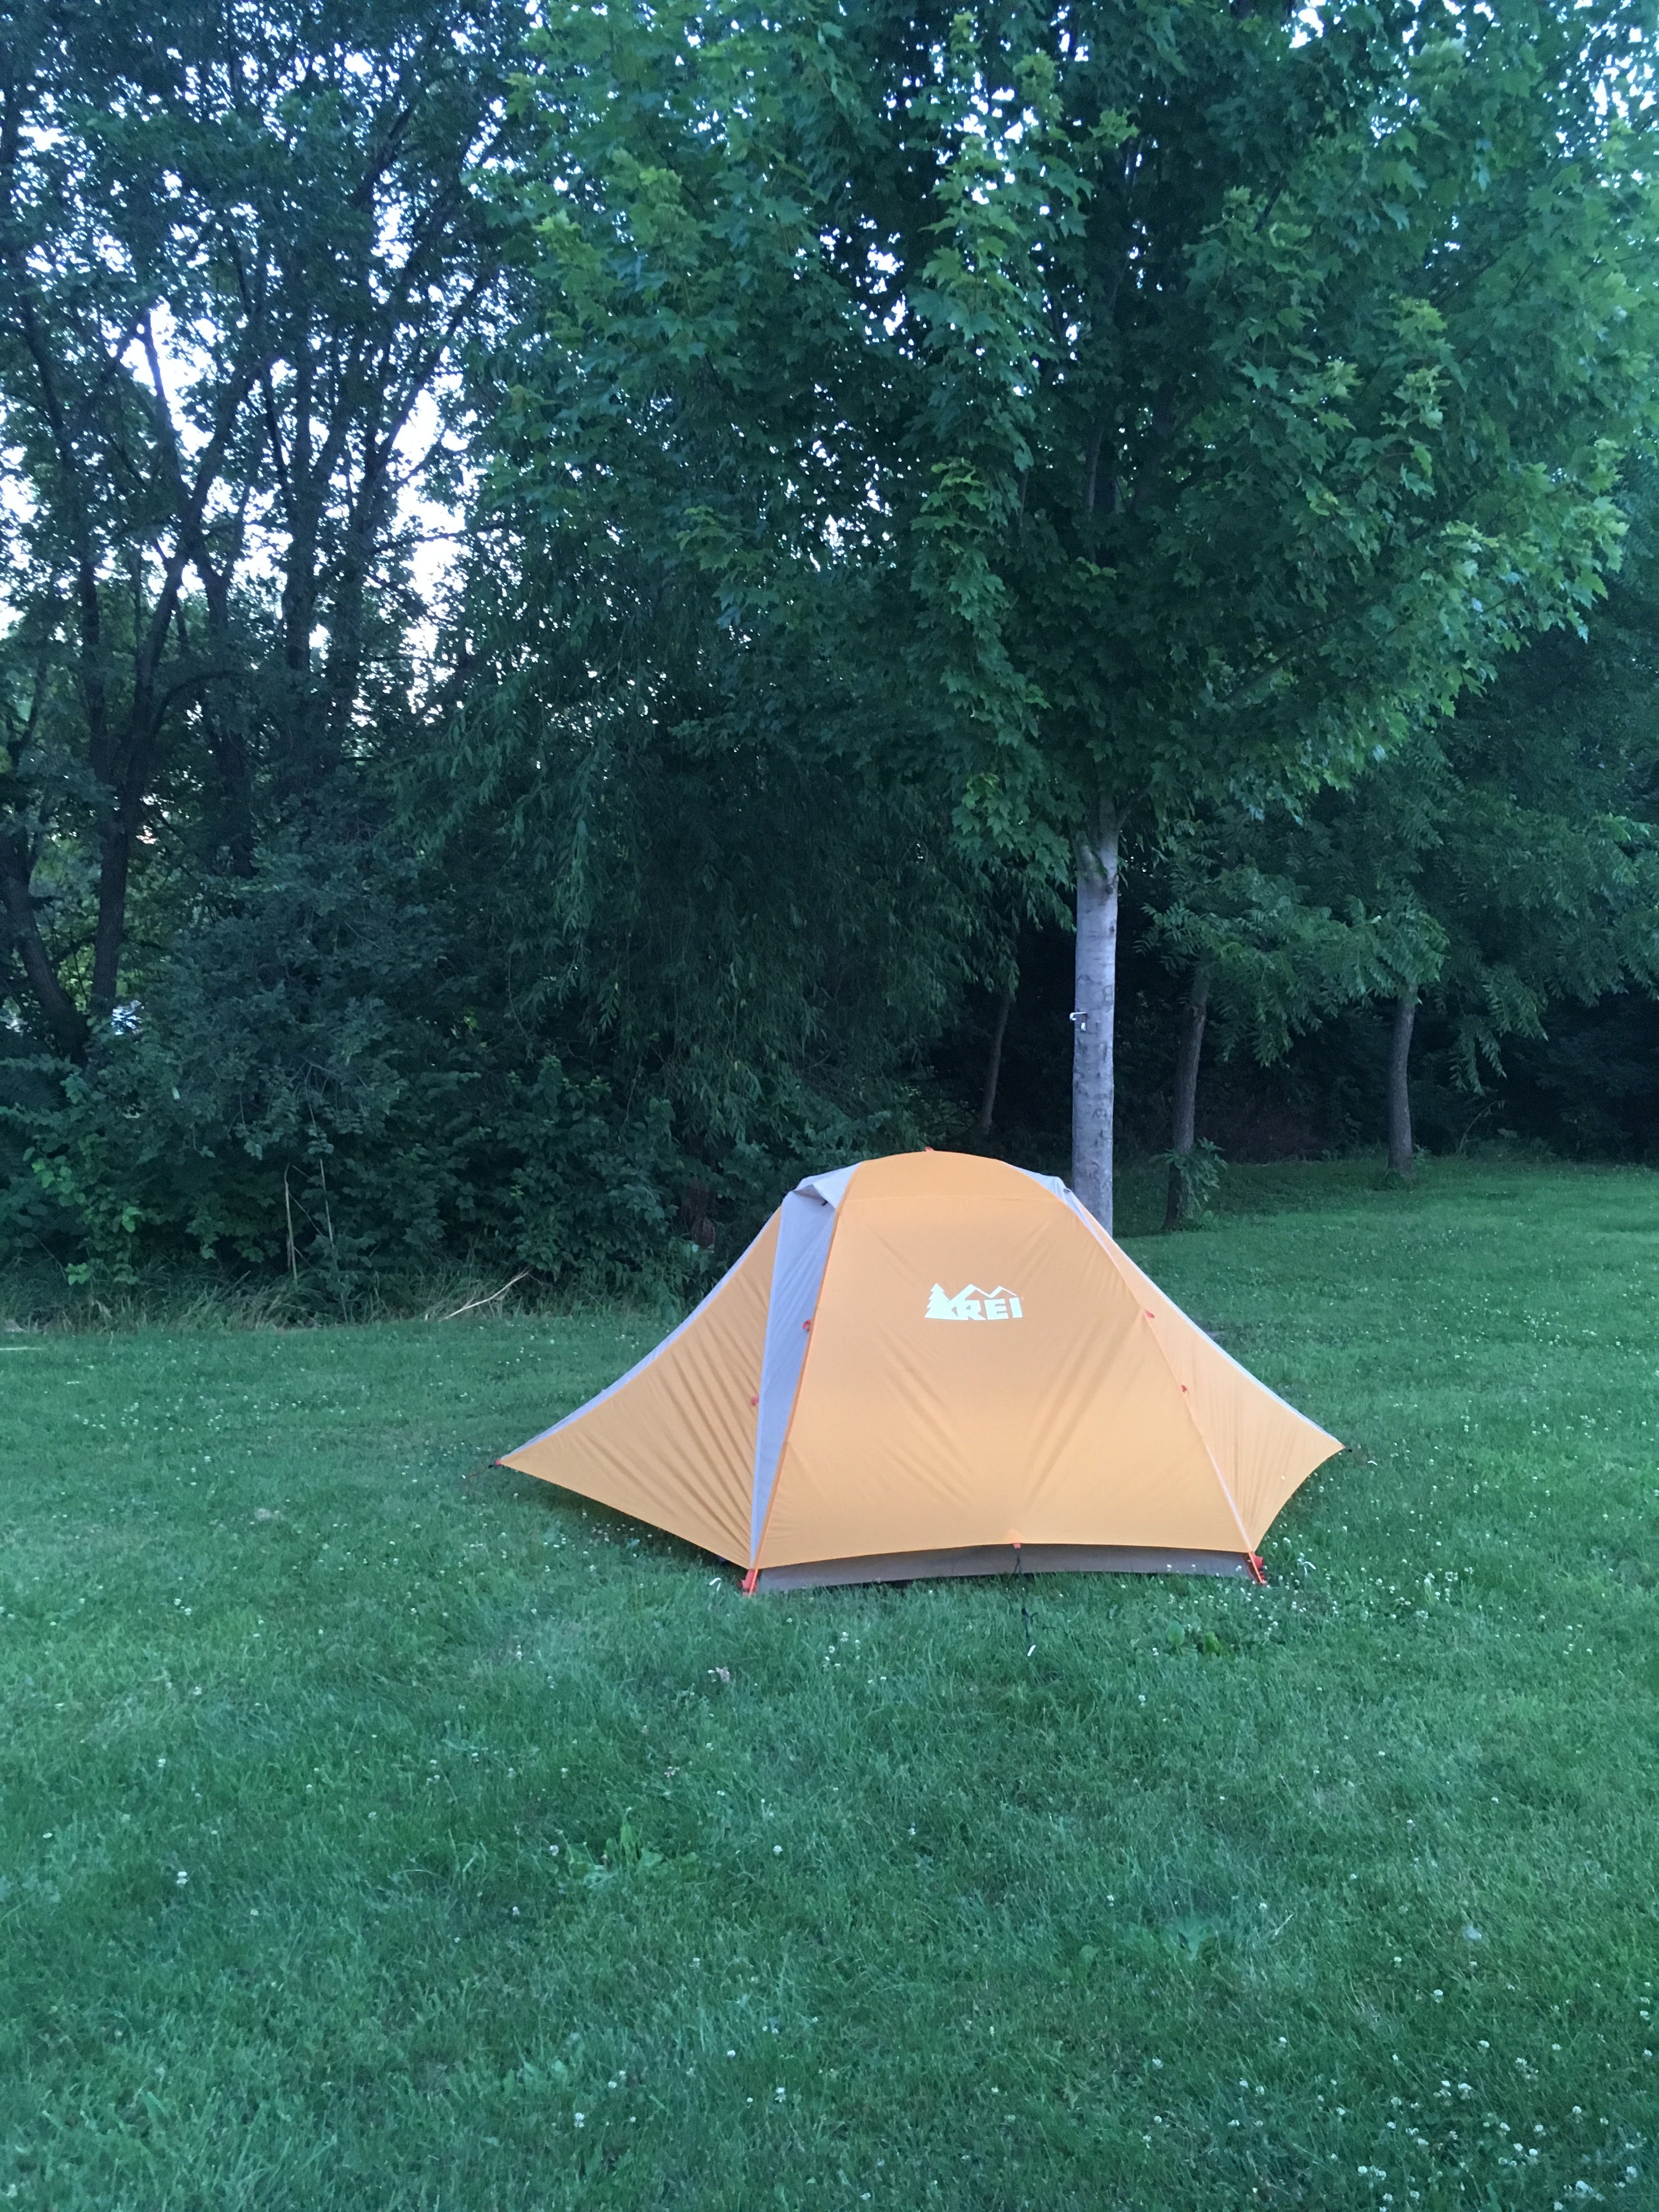 Tent camping in the grass instead of taking a site with hookups